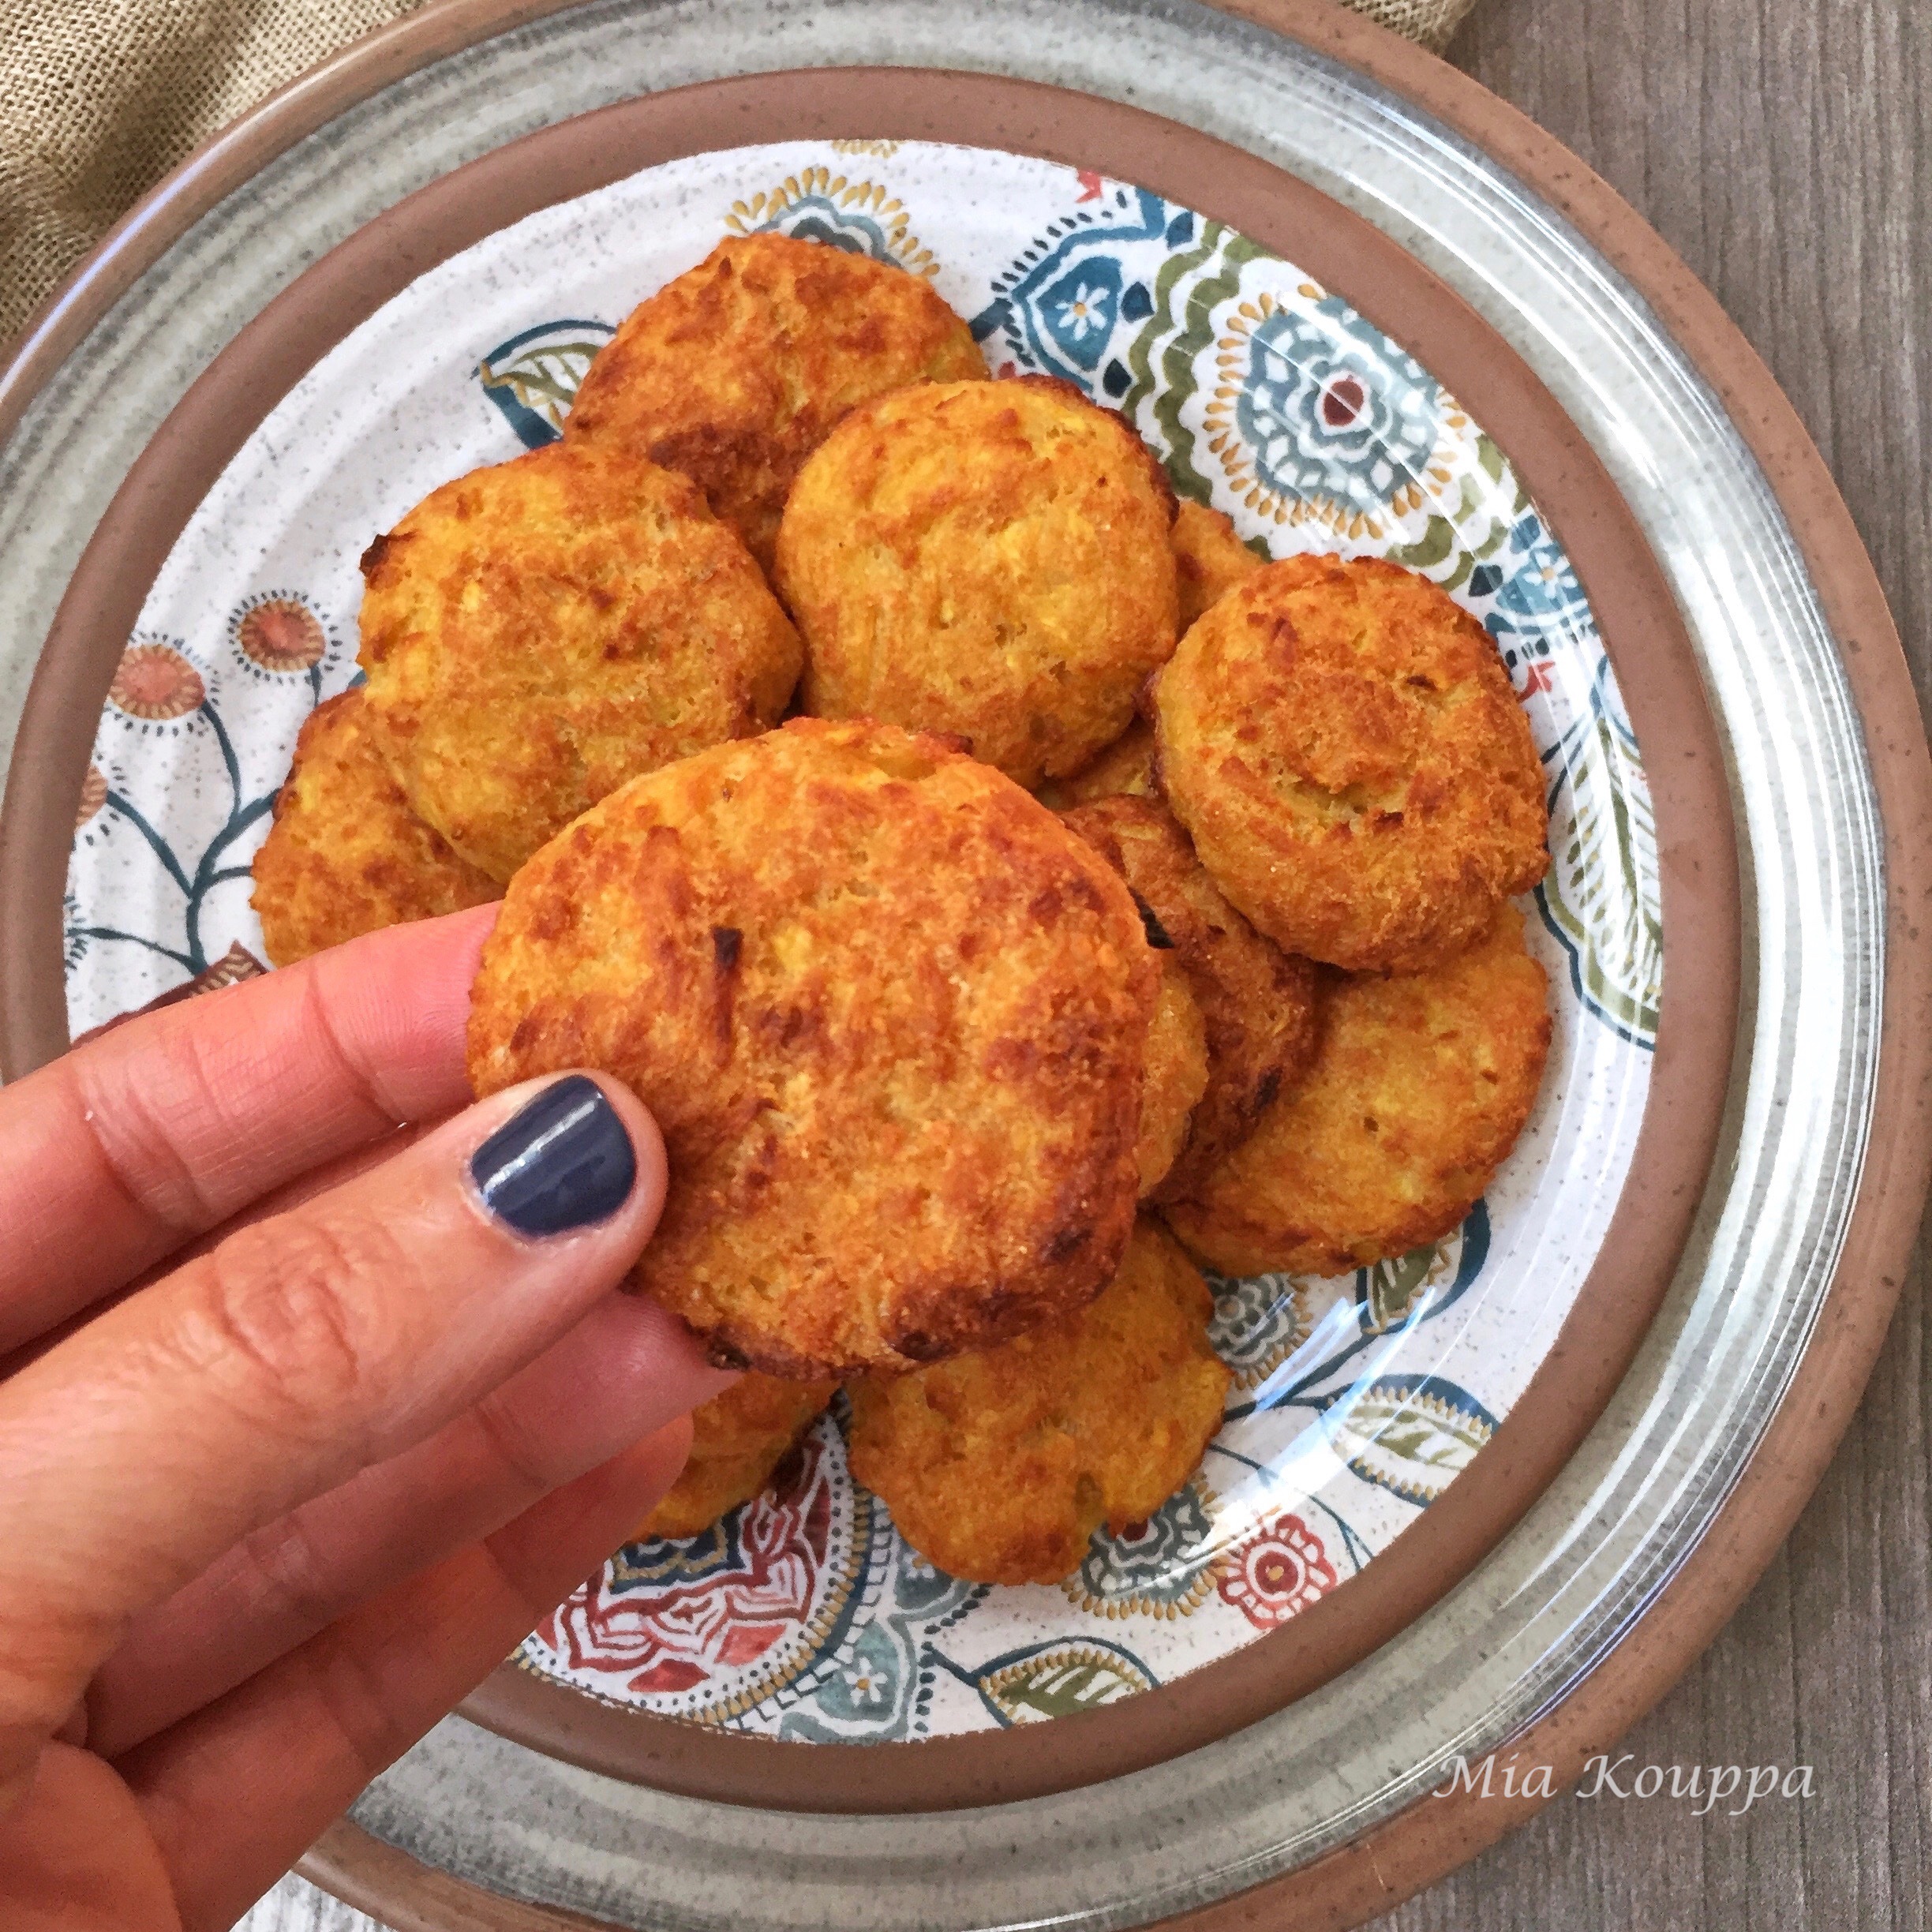 Baked squash fritters without cheese (Κολοκυθοκεφτέδες χωρίς τυρί)